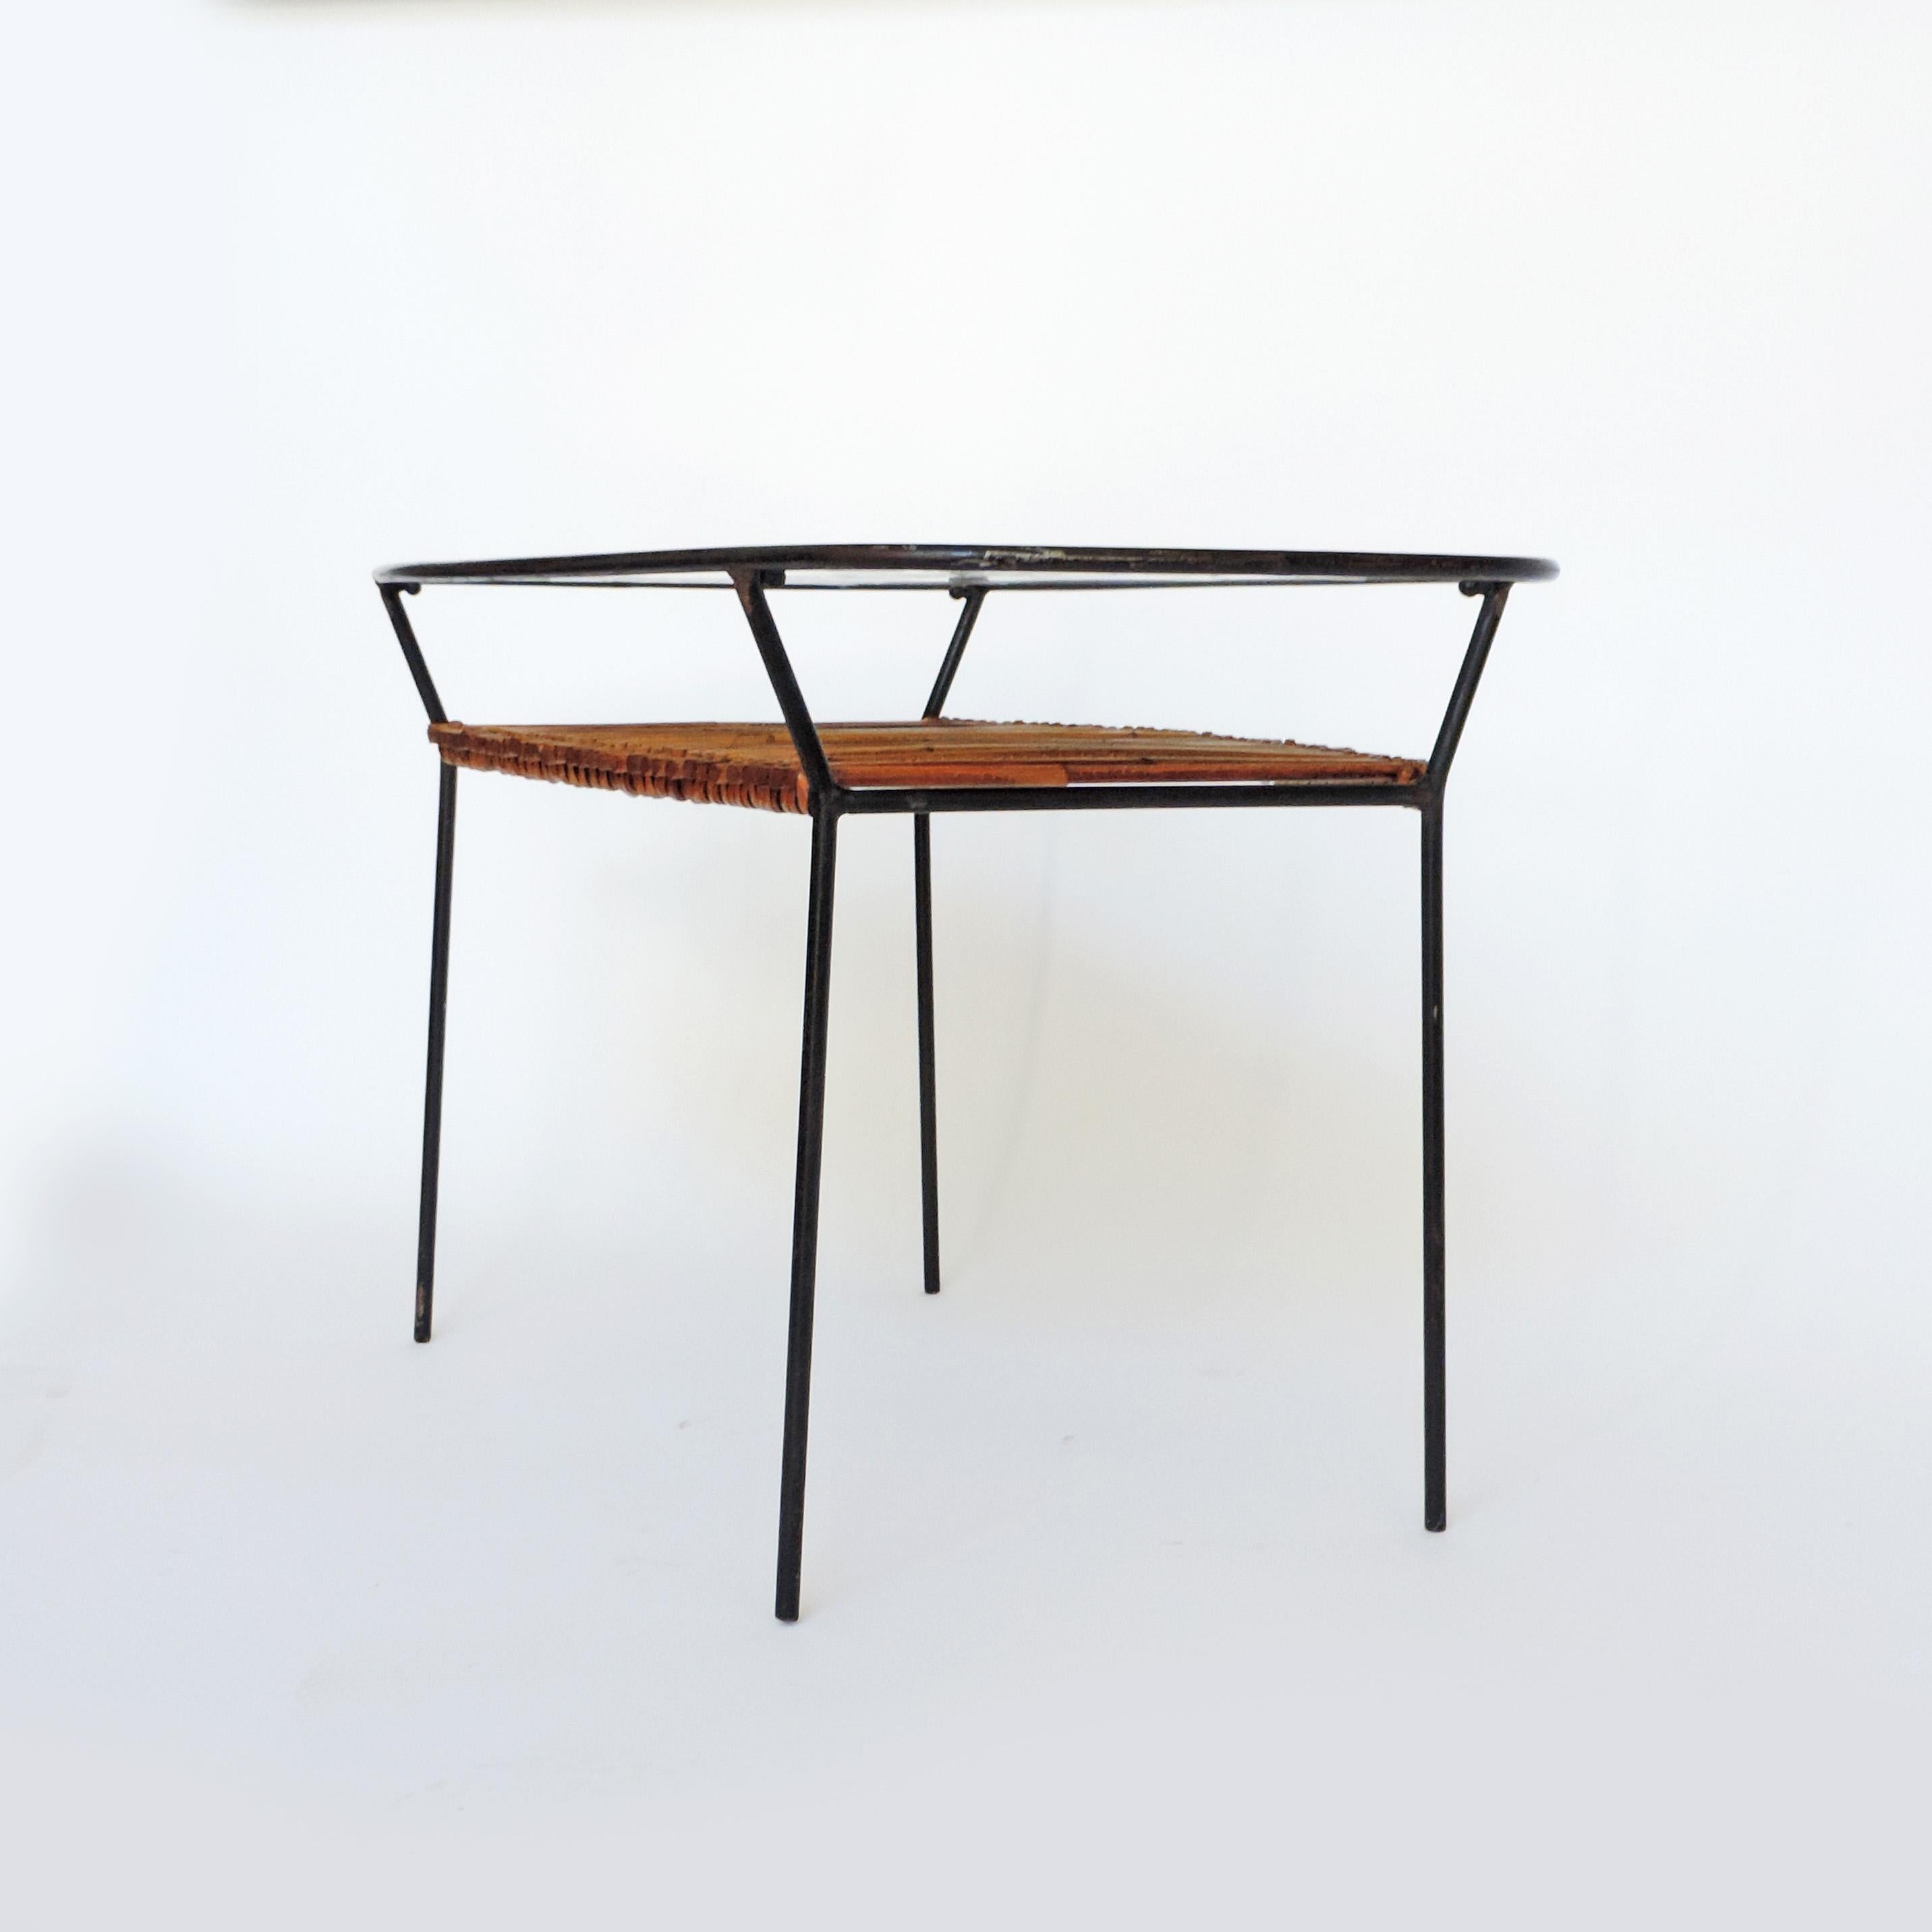 Mid-20th Century Spirali Coffee Table by Spazialismo Artist Roberto Crippa, Italy, 1950s For Sale